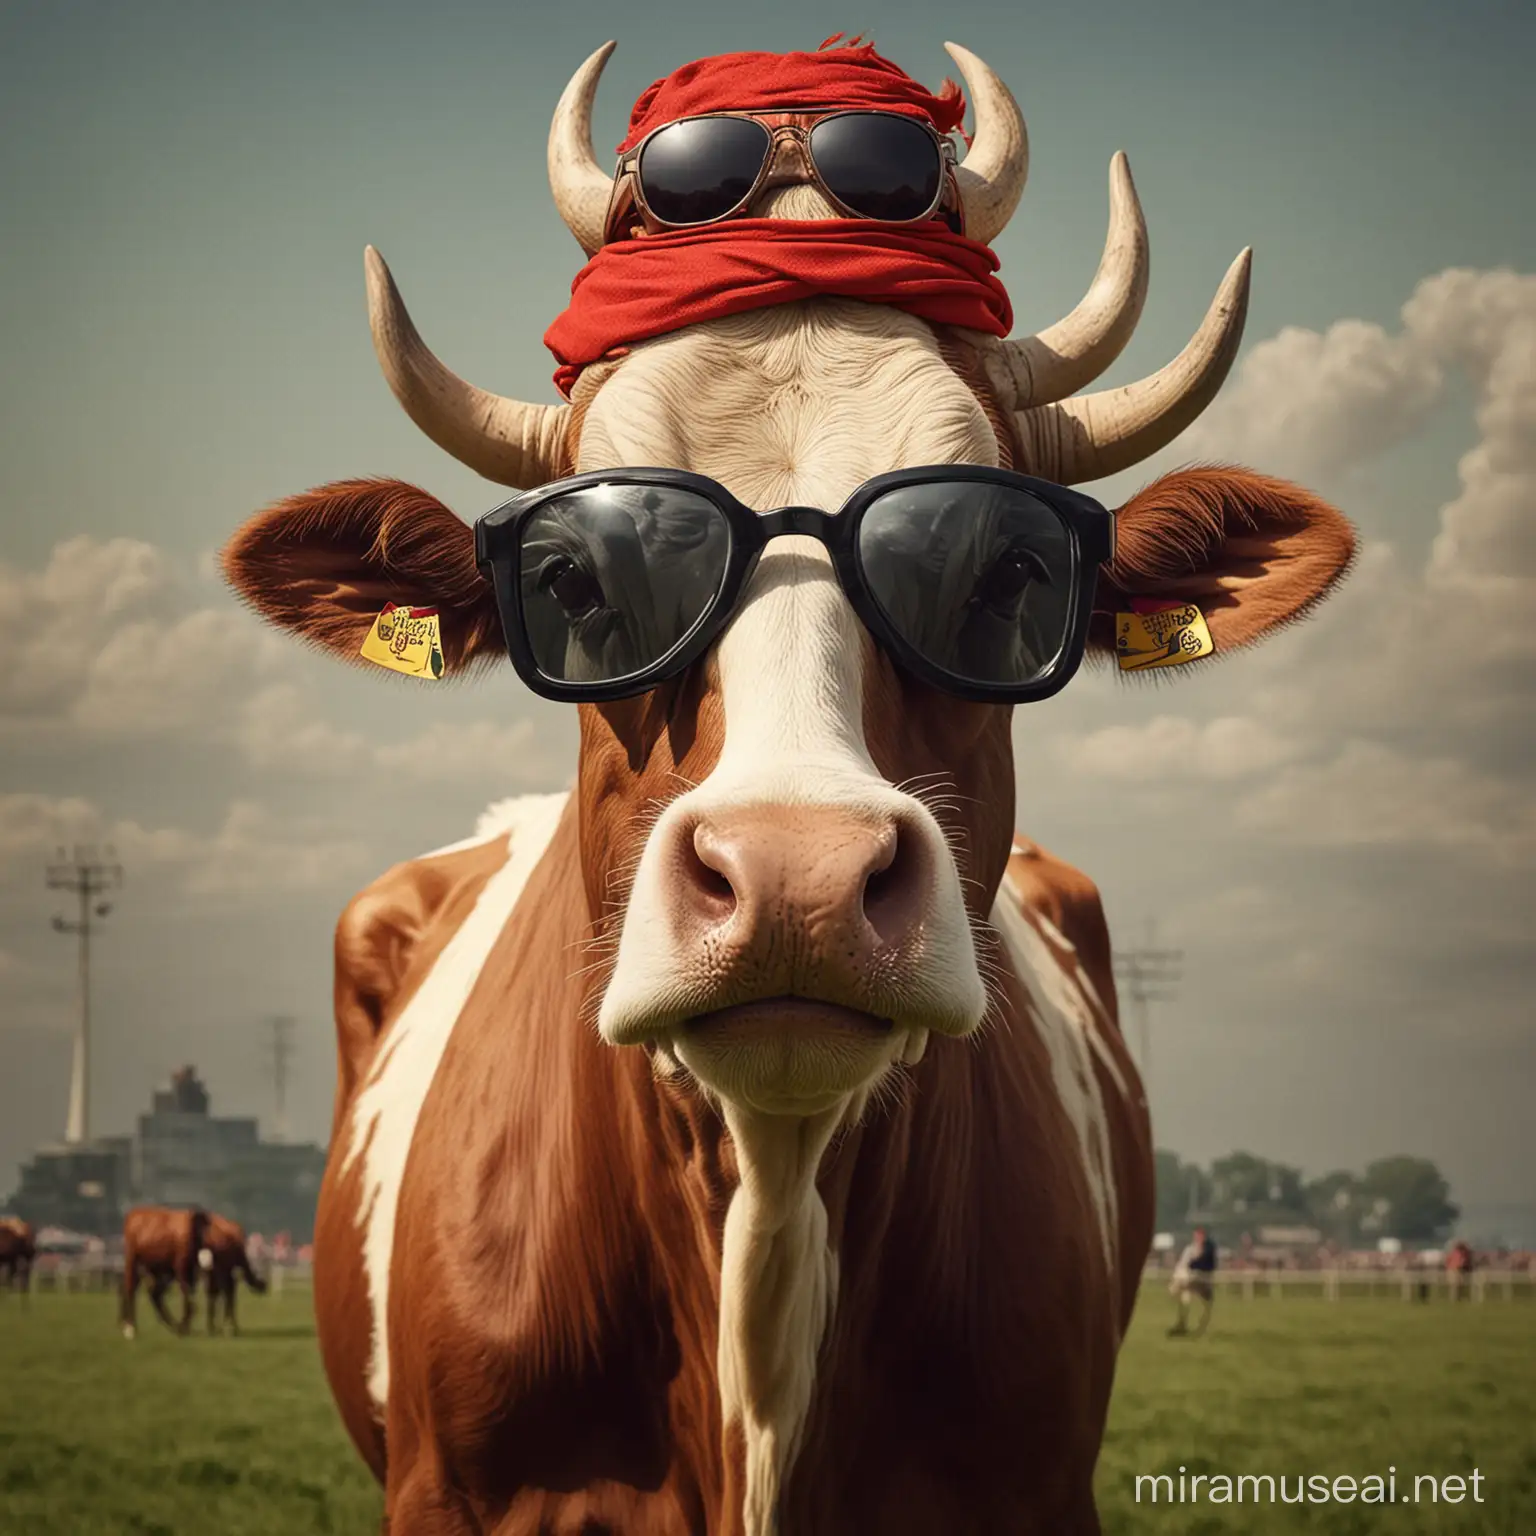 Liverpool Cow with Sunglasses Loses to Manchester United Surrounded by Horse and Bison